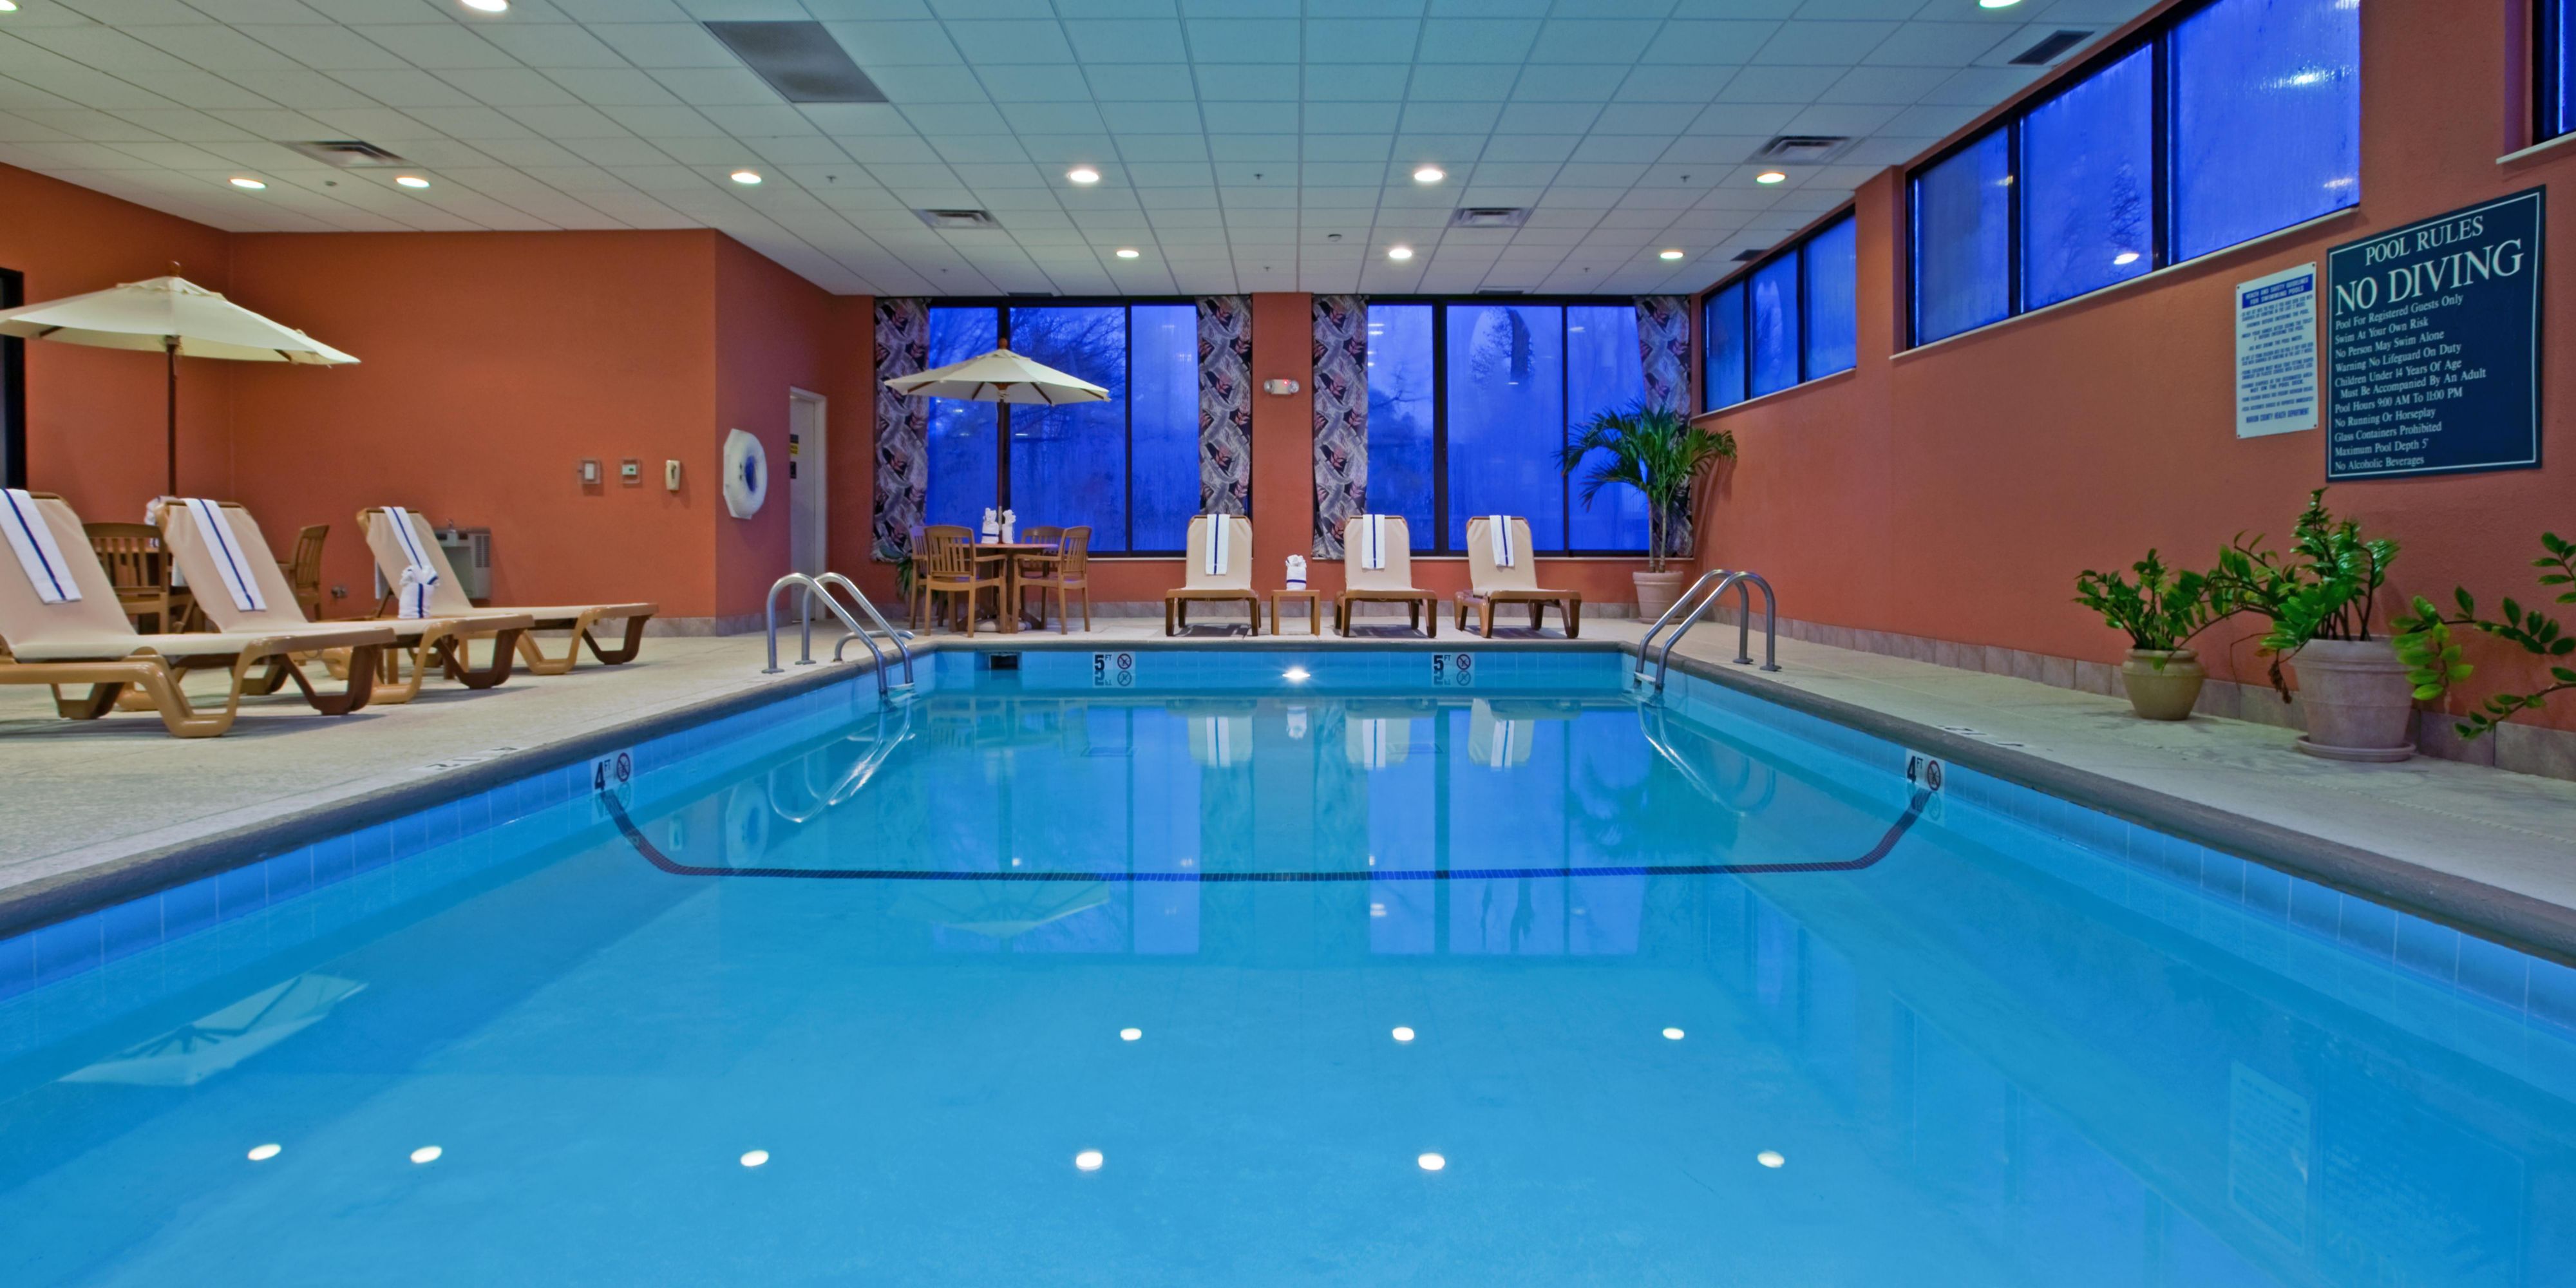 Our hotel in Indianapolis features an indoor pool, perfect for your next getaway! Open year round, we encourage guests to take a dip after a long day of meetings and exploring.